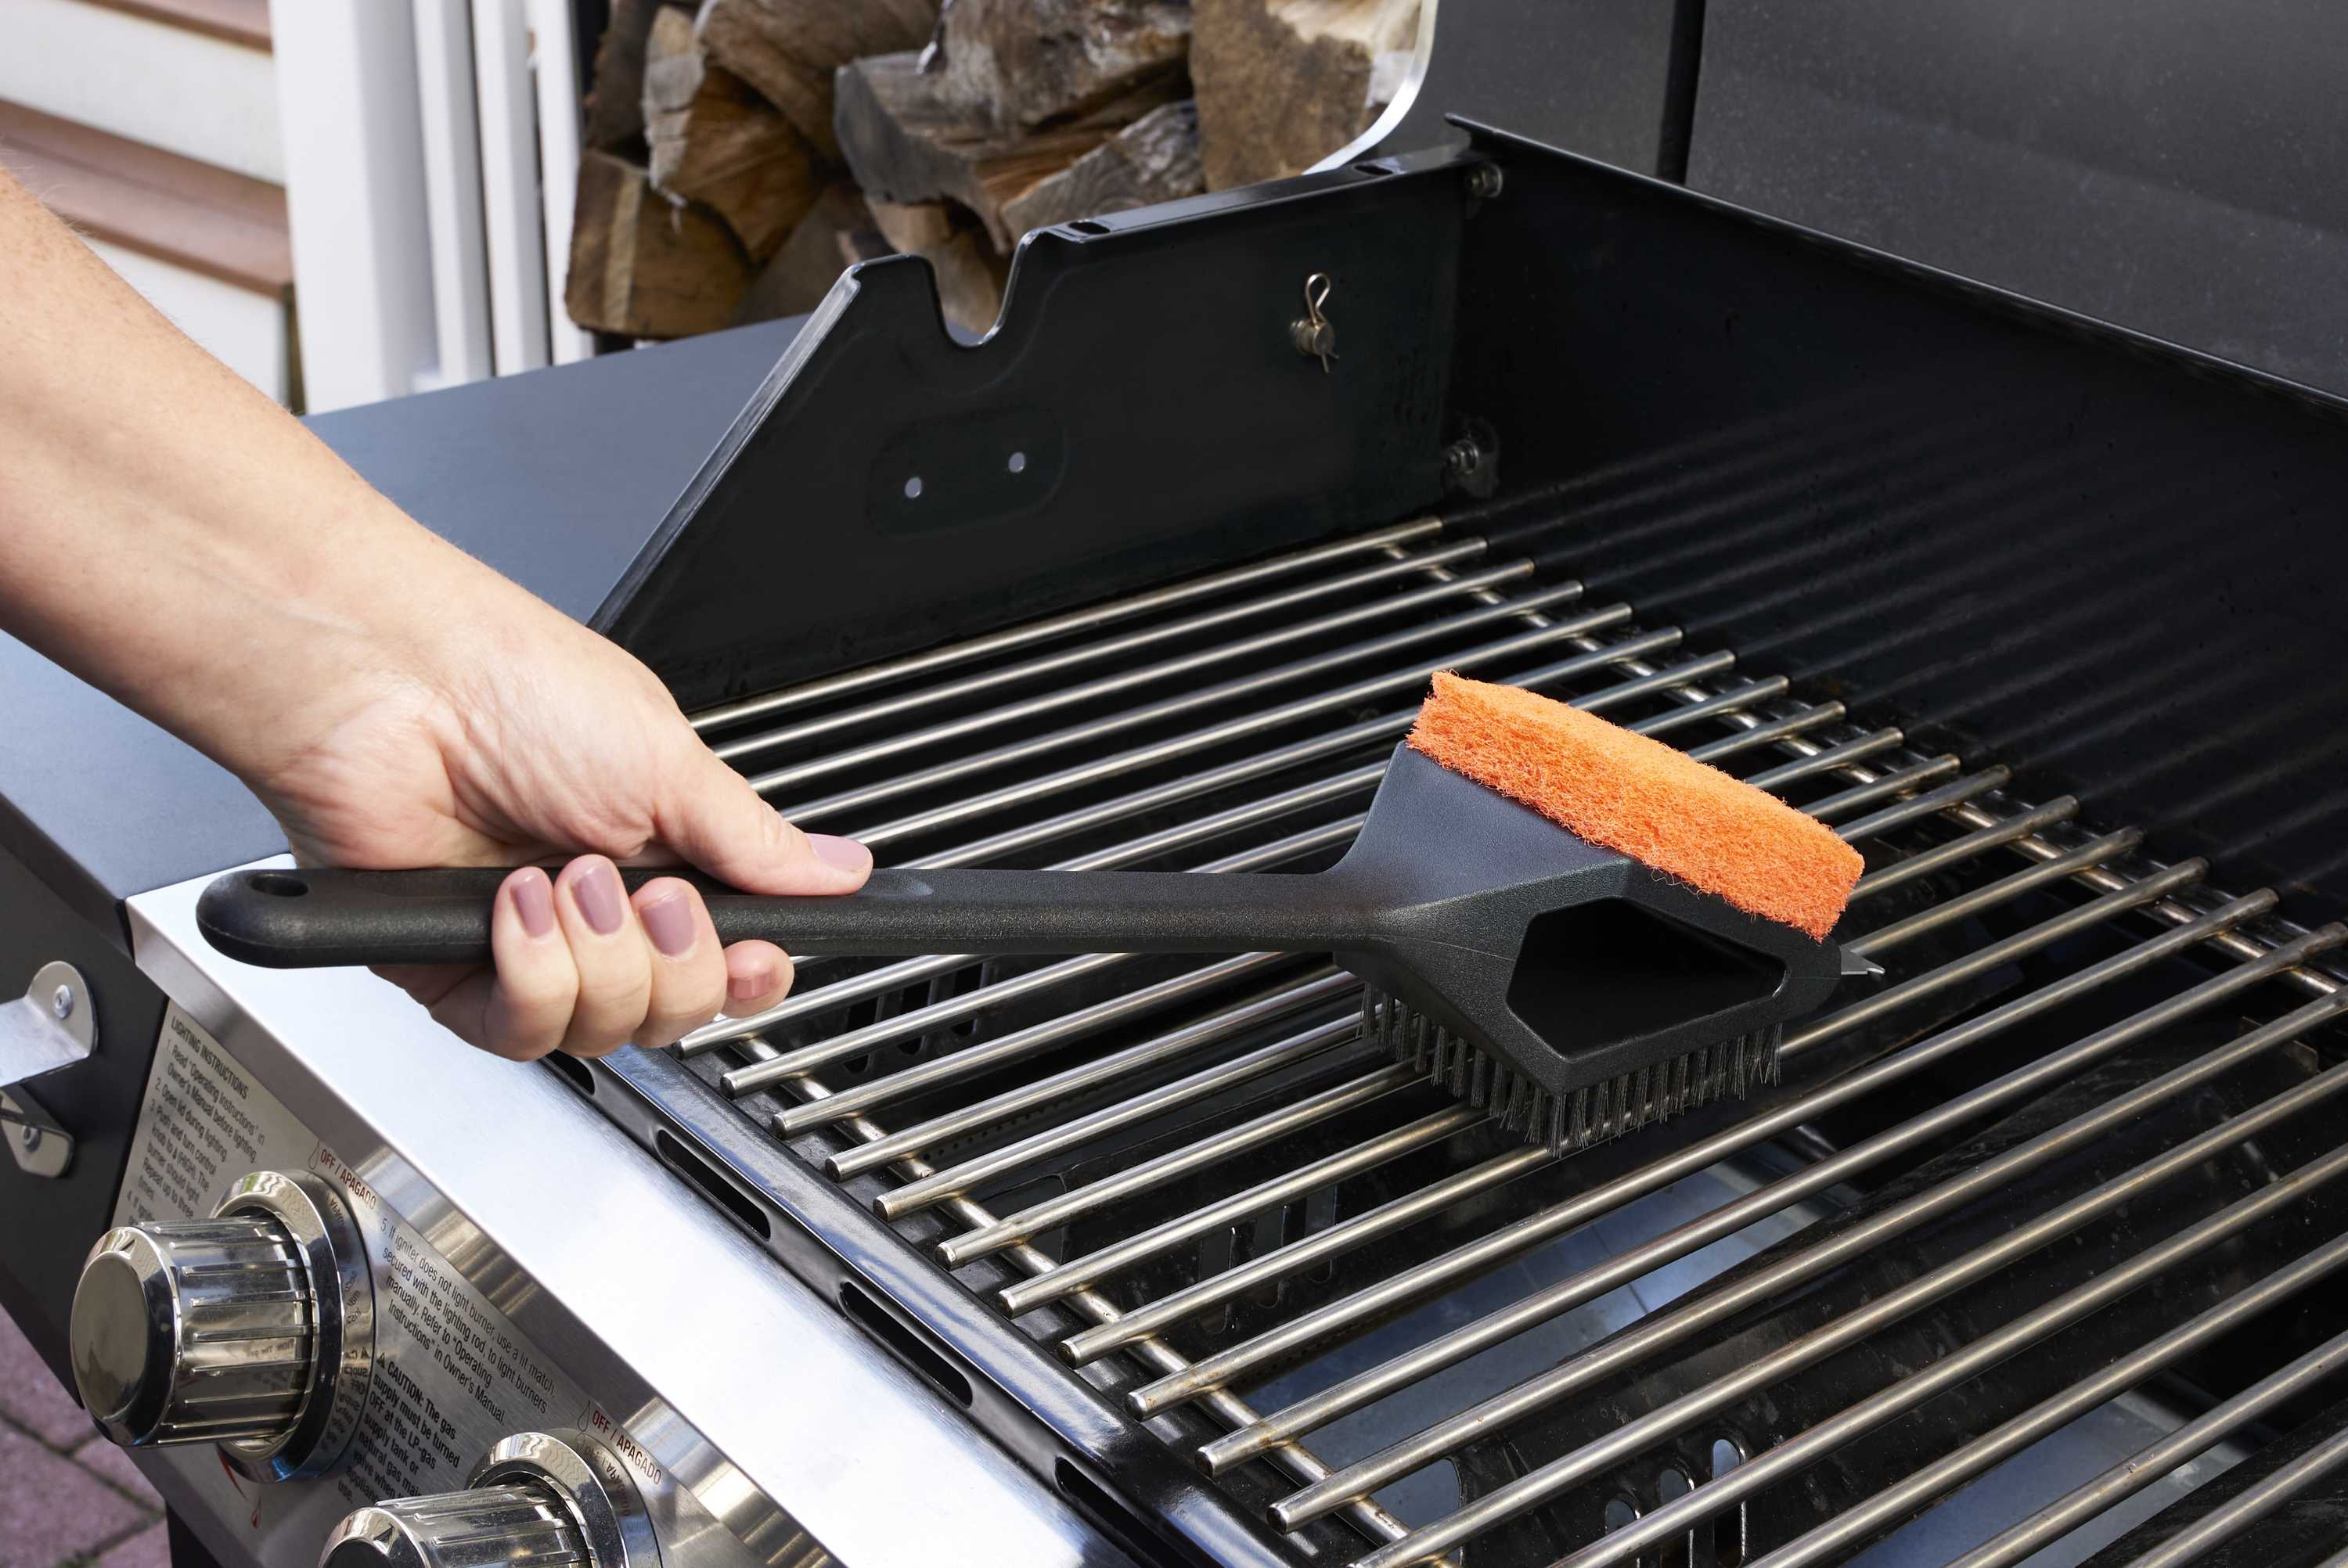 Pork Barrel BBQ Grill Brush w Scraper - Safe Bristle-Free, Heavy Duty Grill  Accessories for Outdoor Grill Cleaning